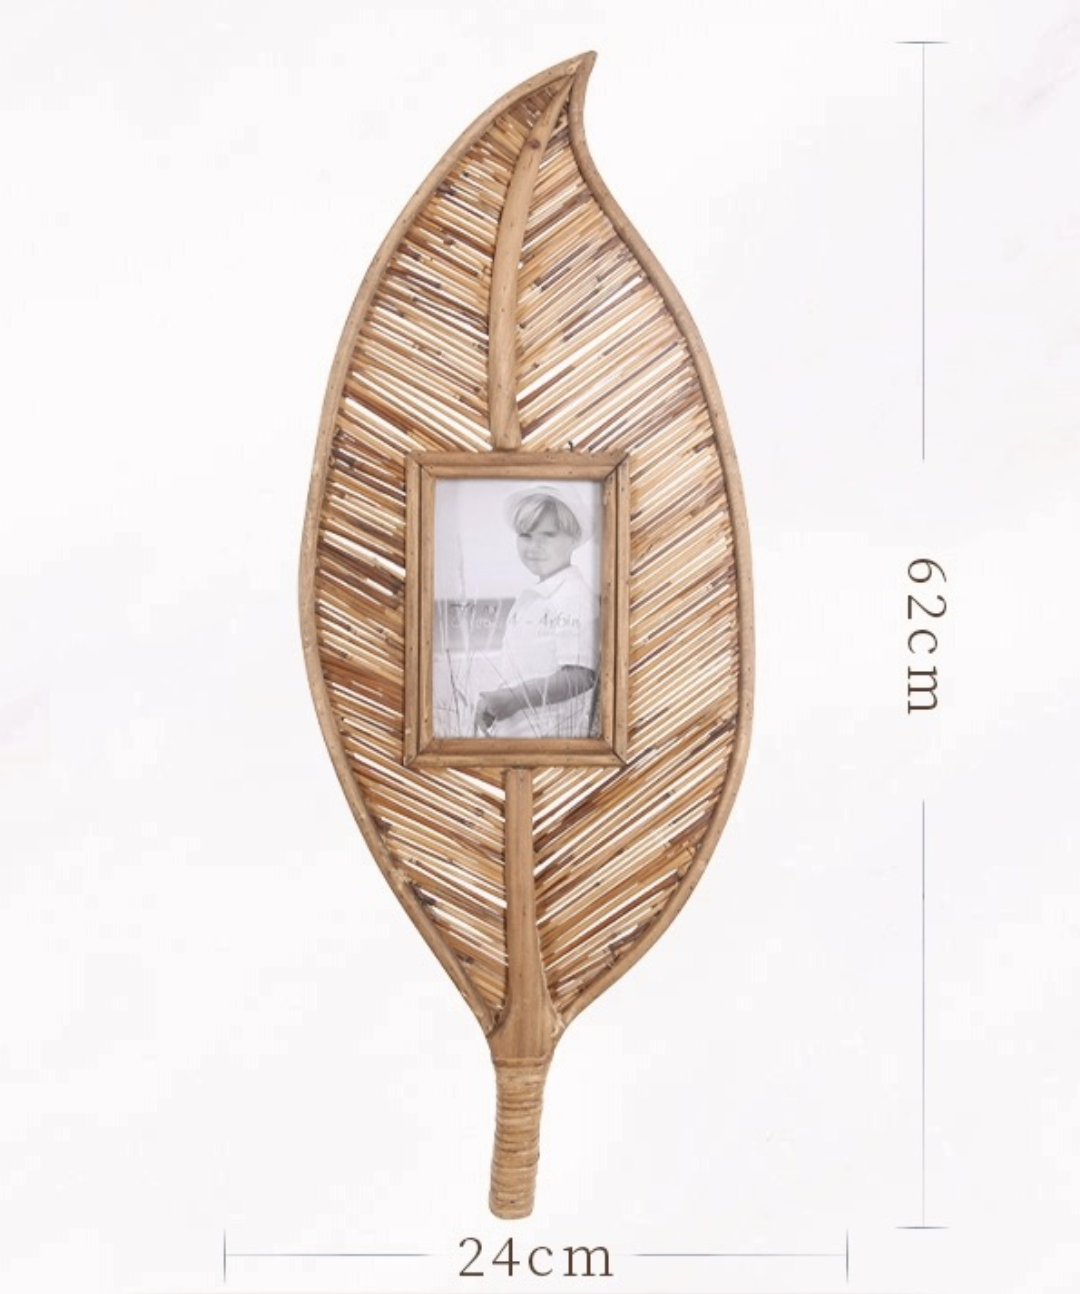 4x6" wooden half handmade wall photo frame with natural reed in leaf shape